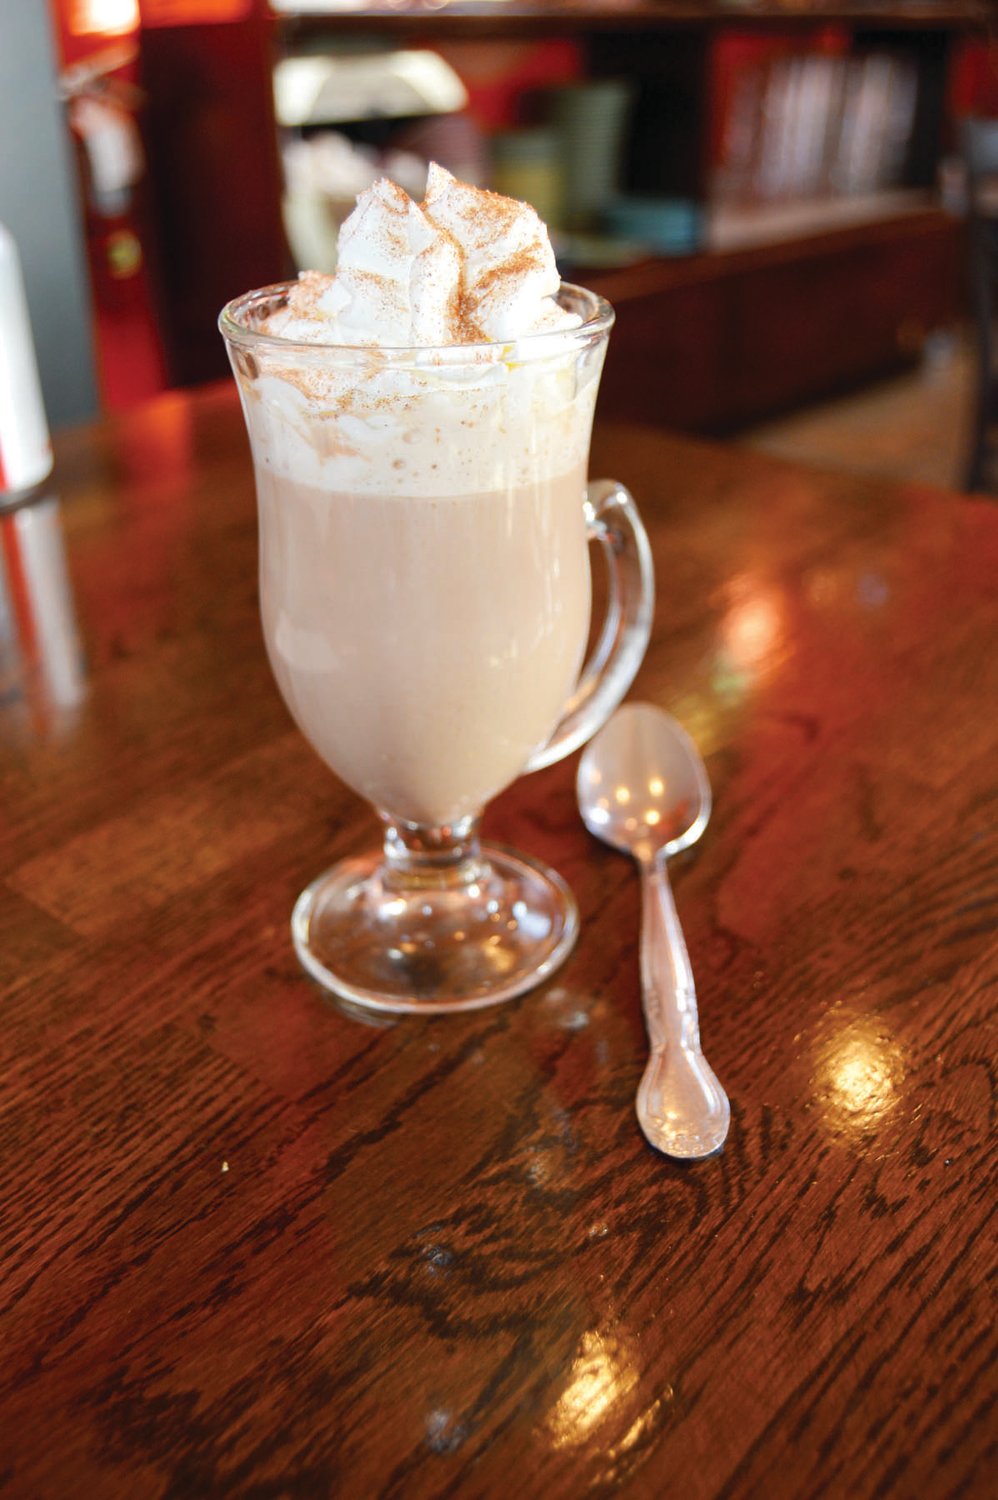 Peruvian hot chocolate at El Tulé restaurant in Lambertville, N.J., is quickly becoming a favorite dessert among customers.